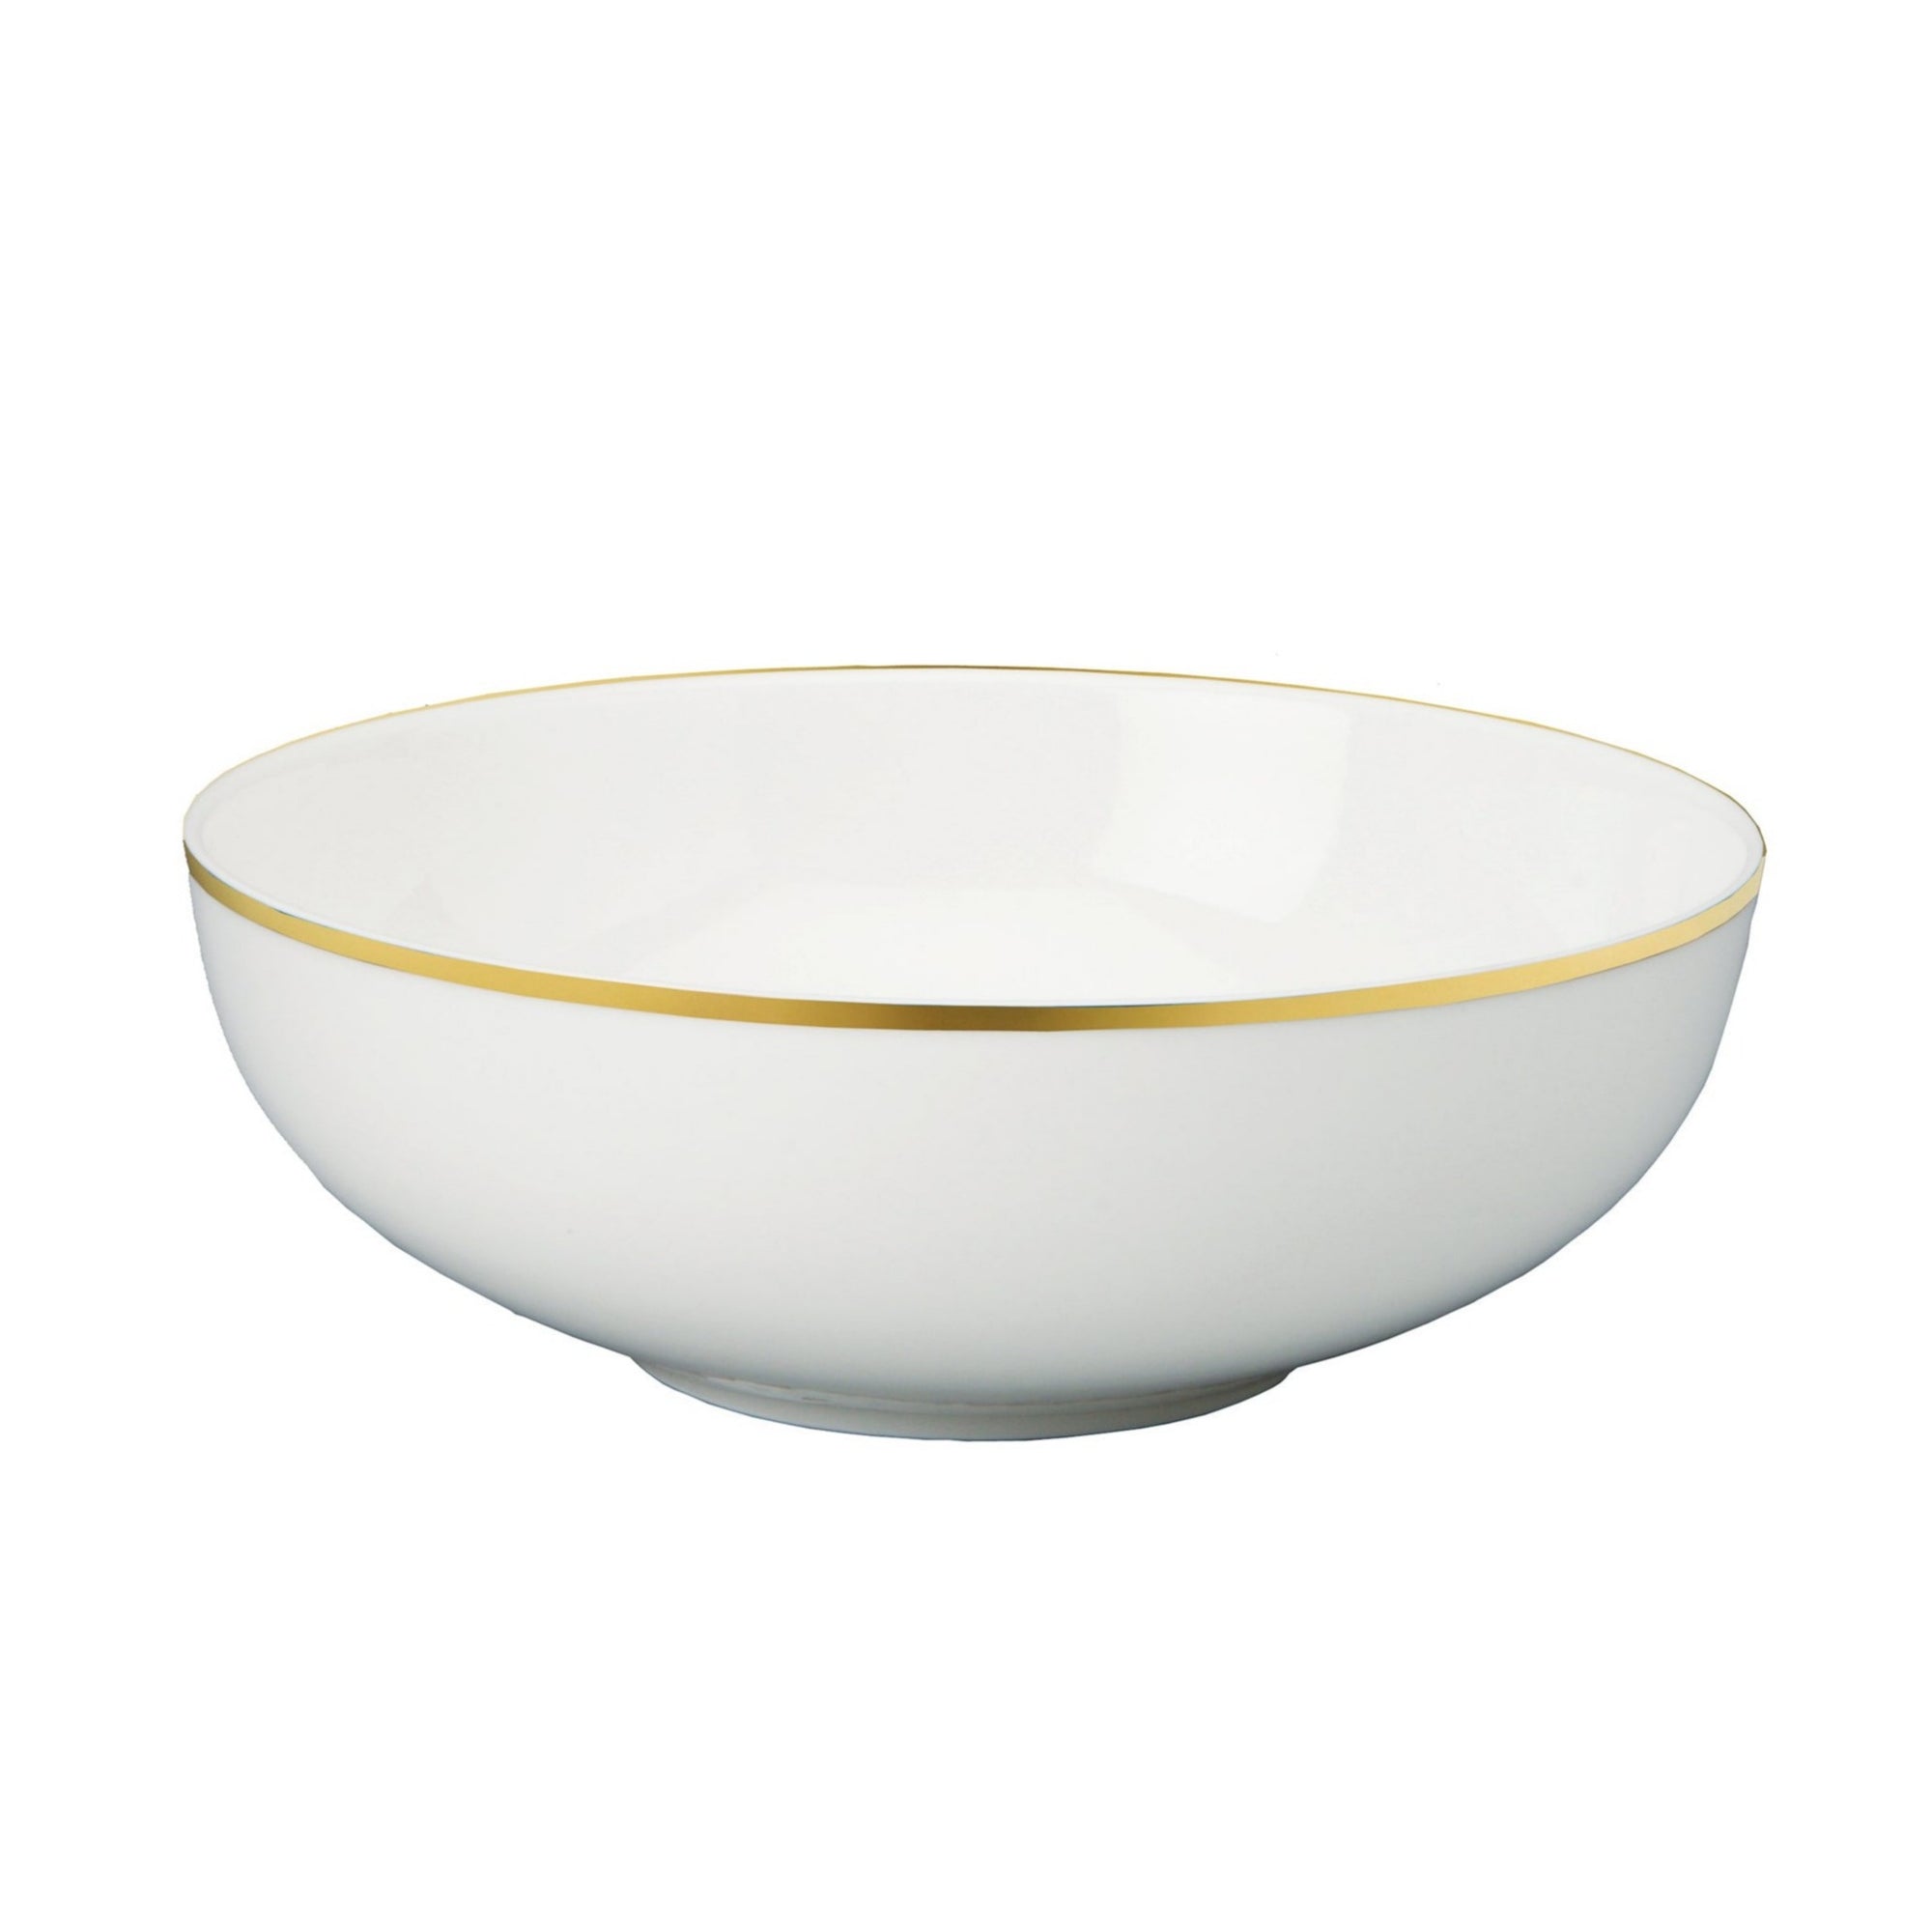 Prouna Comet Gold Serving Bowl White Background Photo